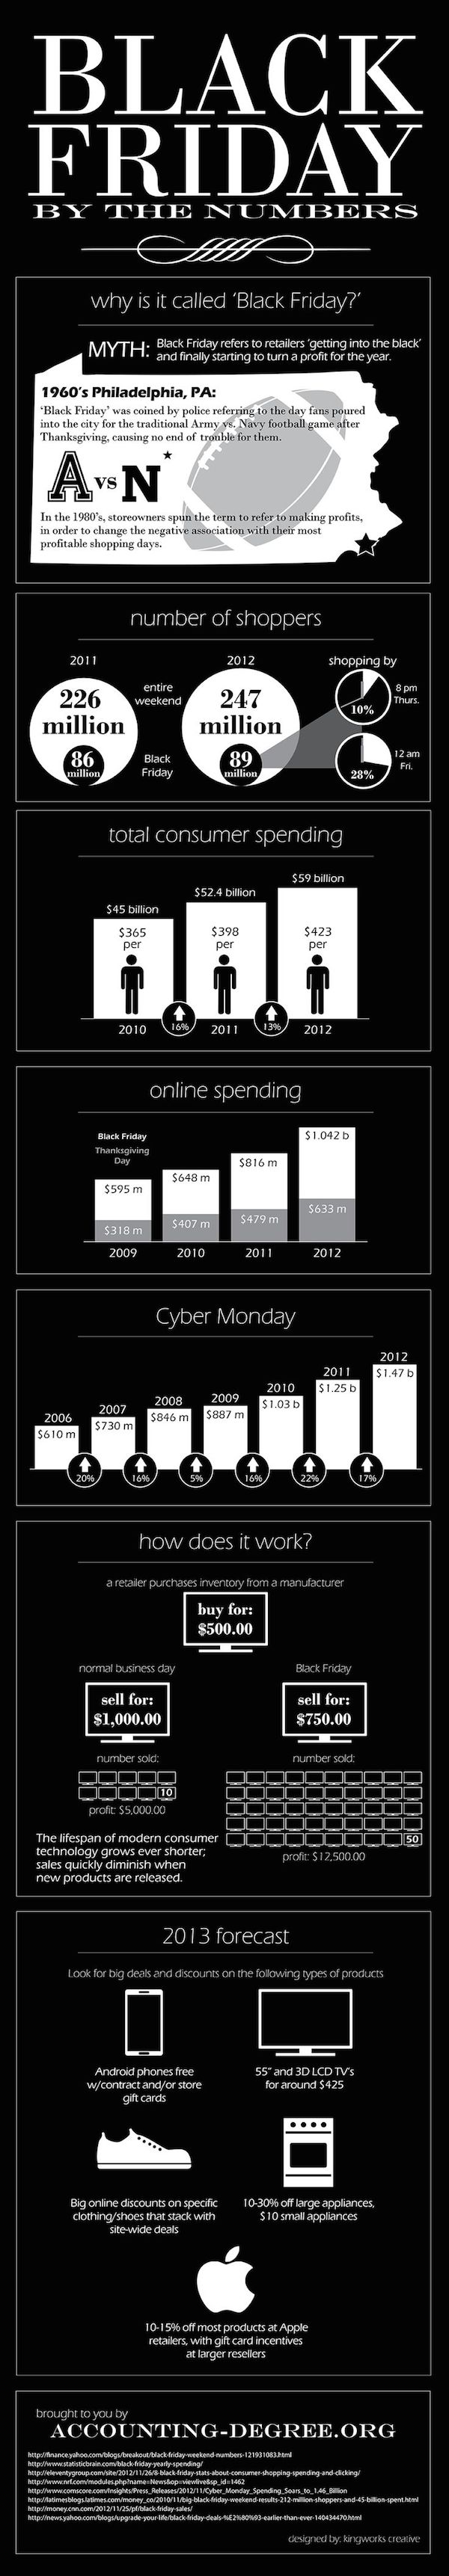 20 Black Friday And Cyber Monday Infographics image 41.jpg1